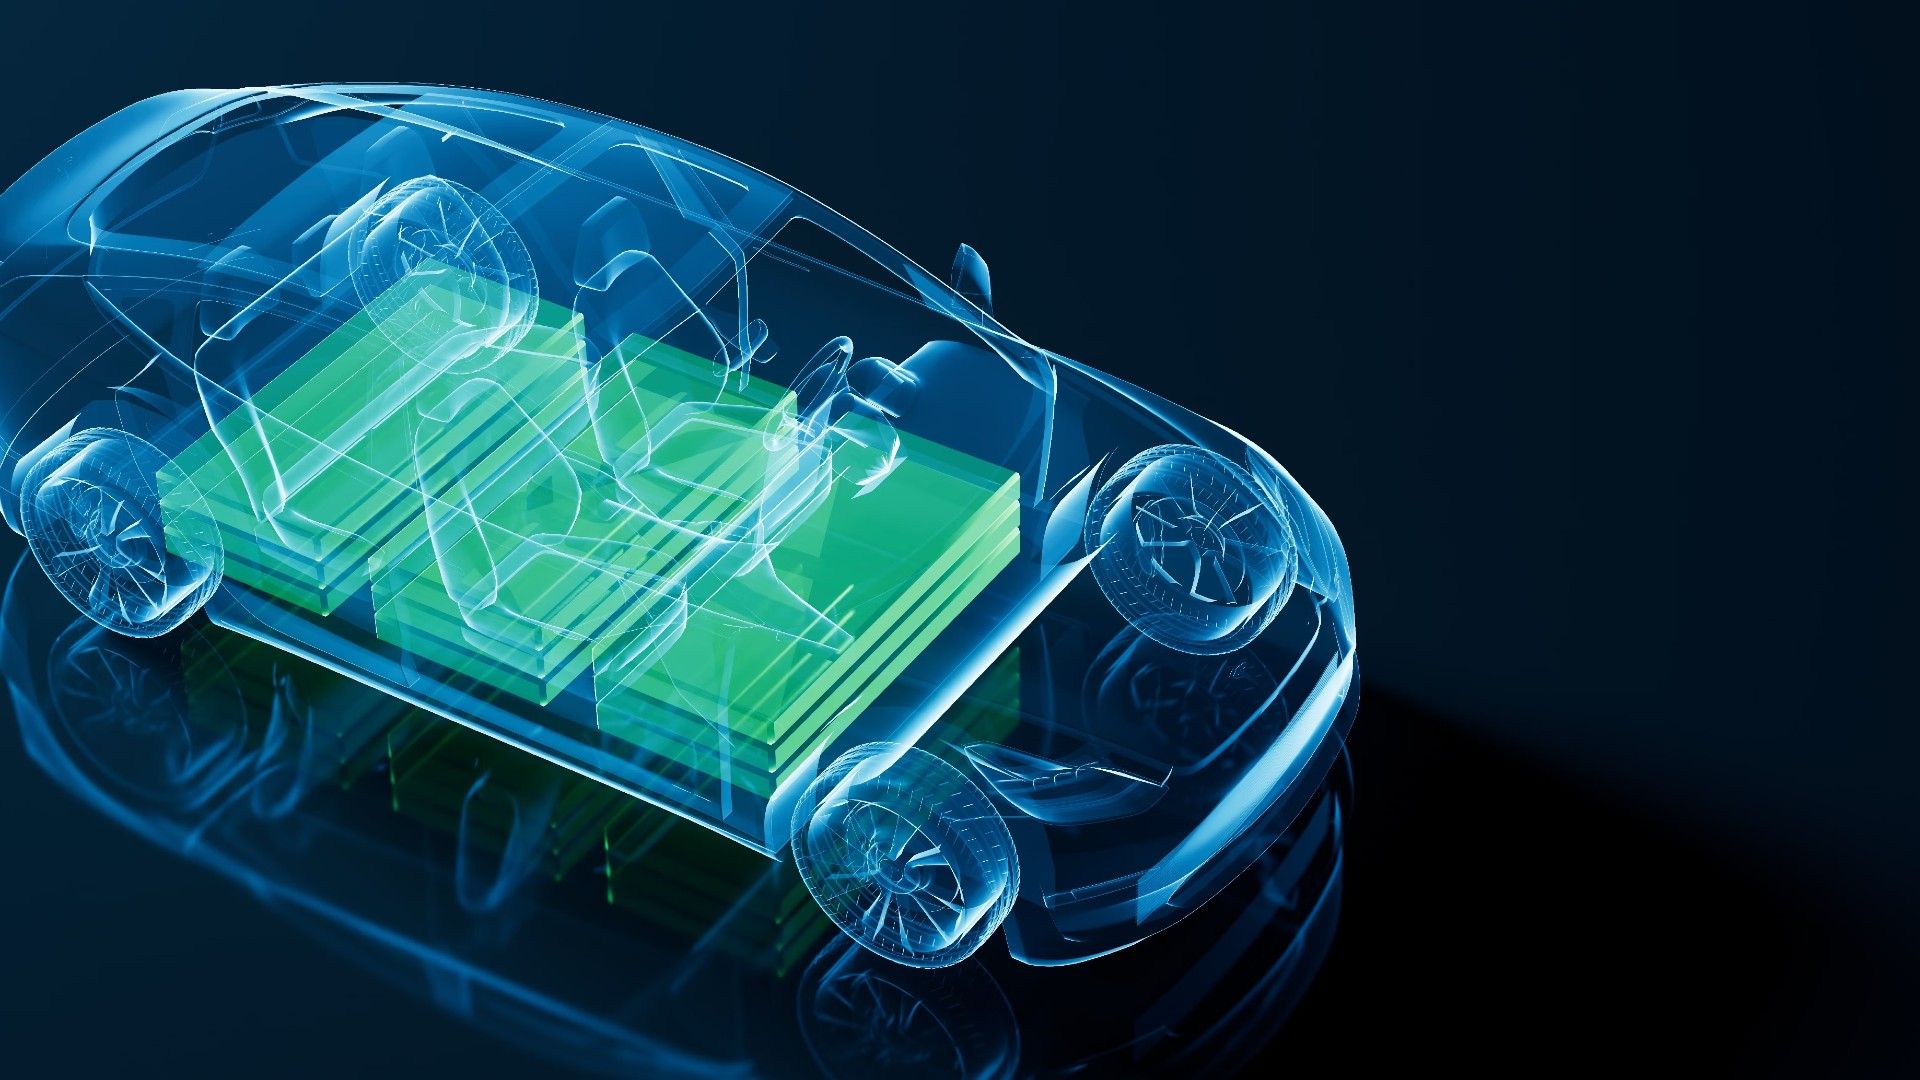 Electric Vehicles and solid-state batteries offer a greener future for the automotive industry